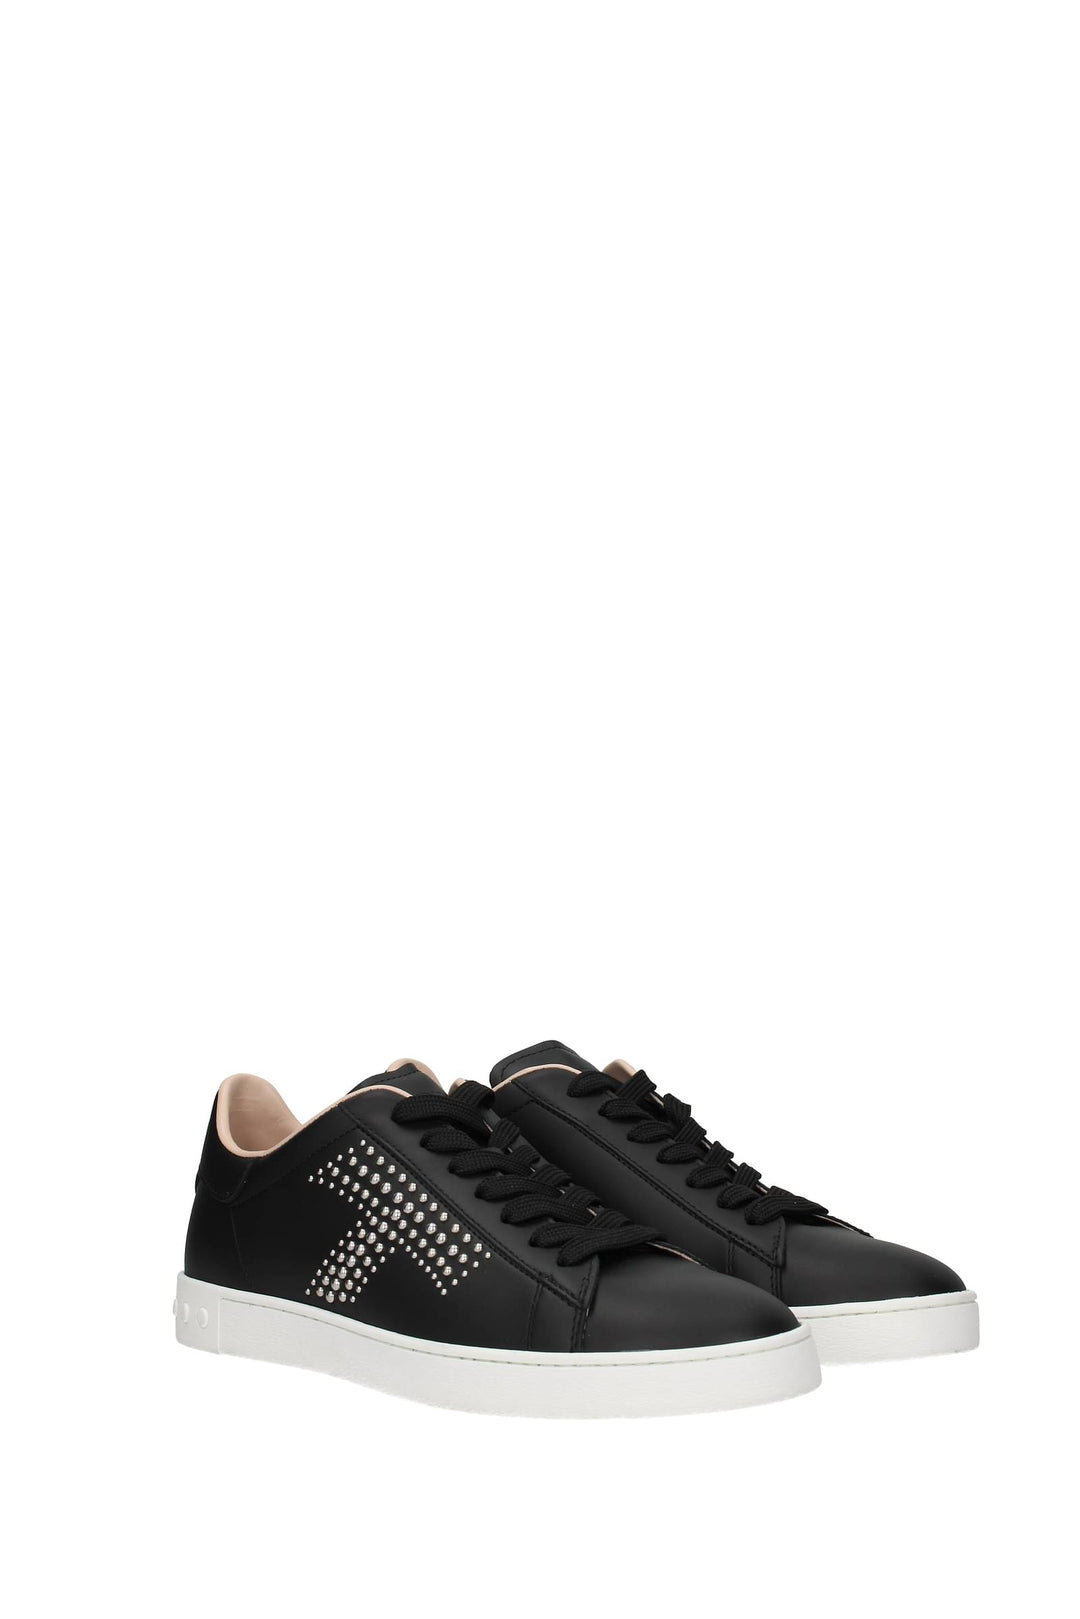 Sneakers Pelle Nero - Tod's - Donna